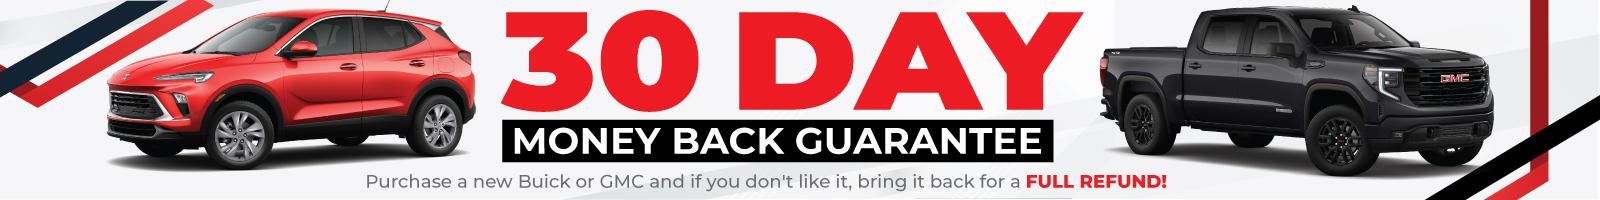 30 Day Money Back Guarantee - Purchase a new Buick or GMC and if you don't like it, bring it back for a full refund!